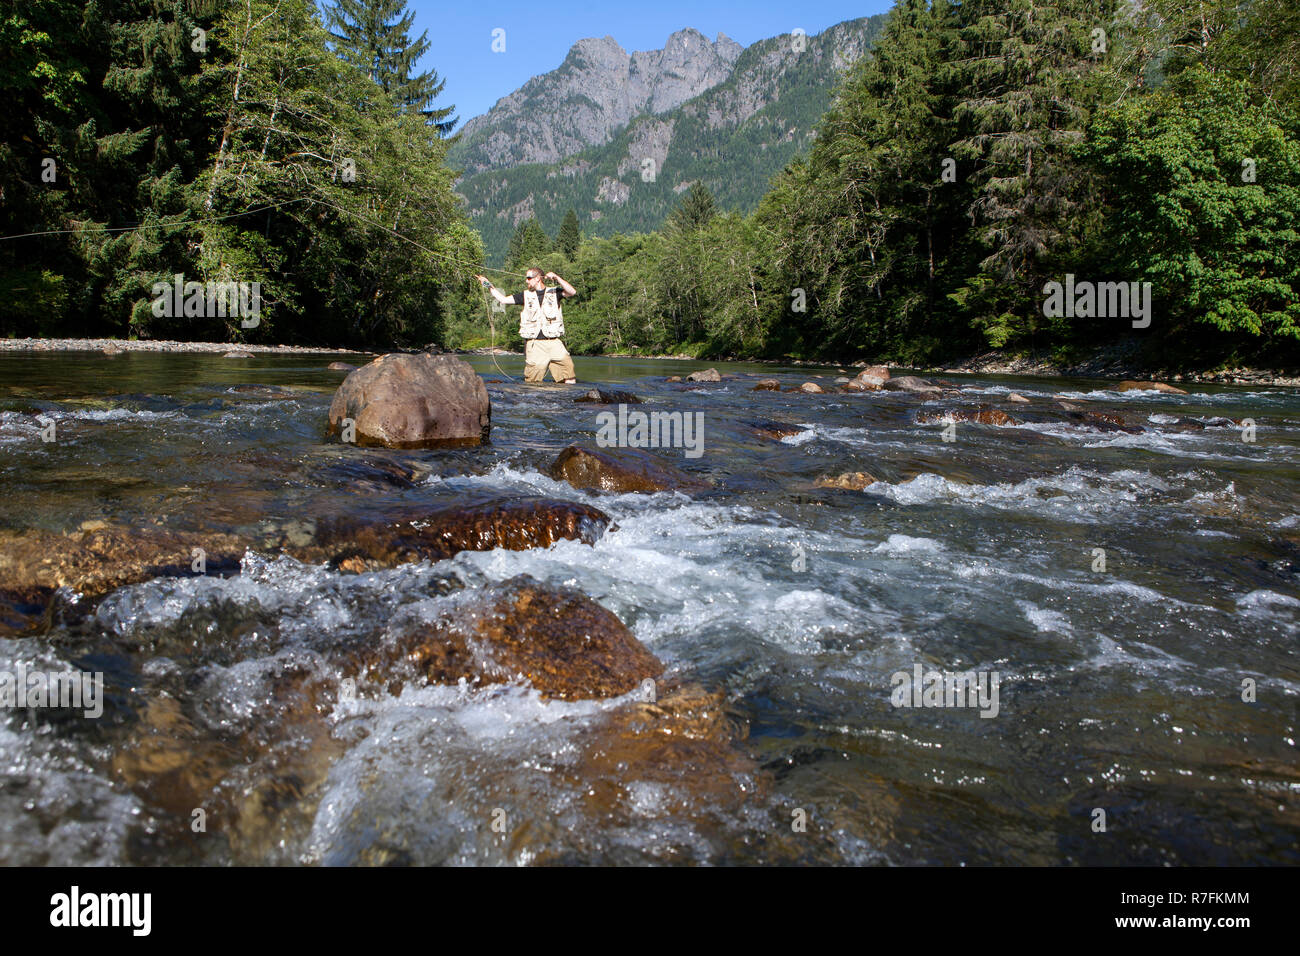 WA09153-00...WASHINGTON - Fly fishing on the Middle Fork of the Snoqualme River near North Bend. (MR# J9) Stock Photo